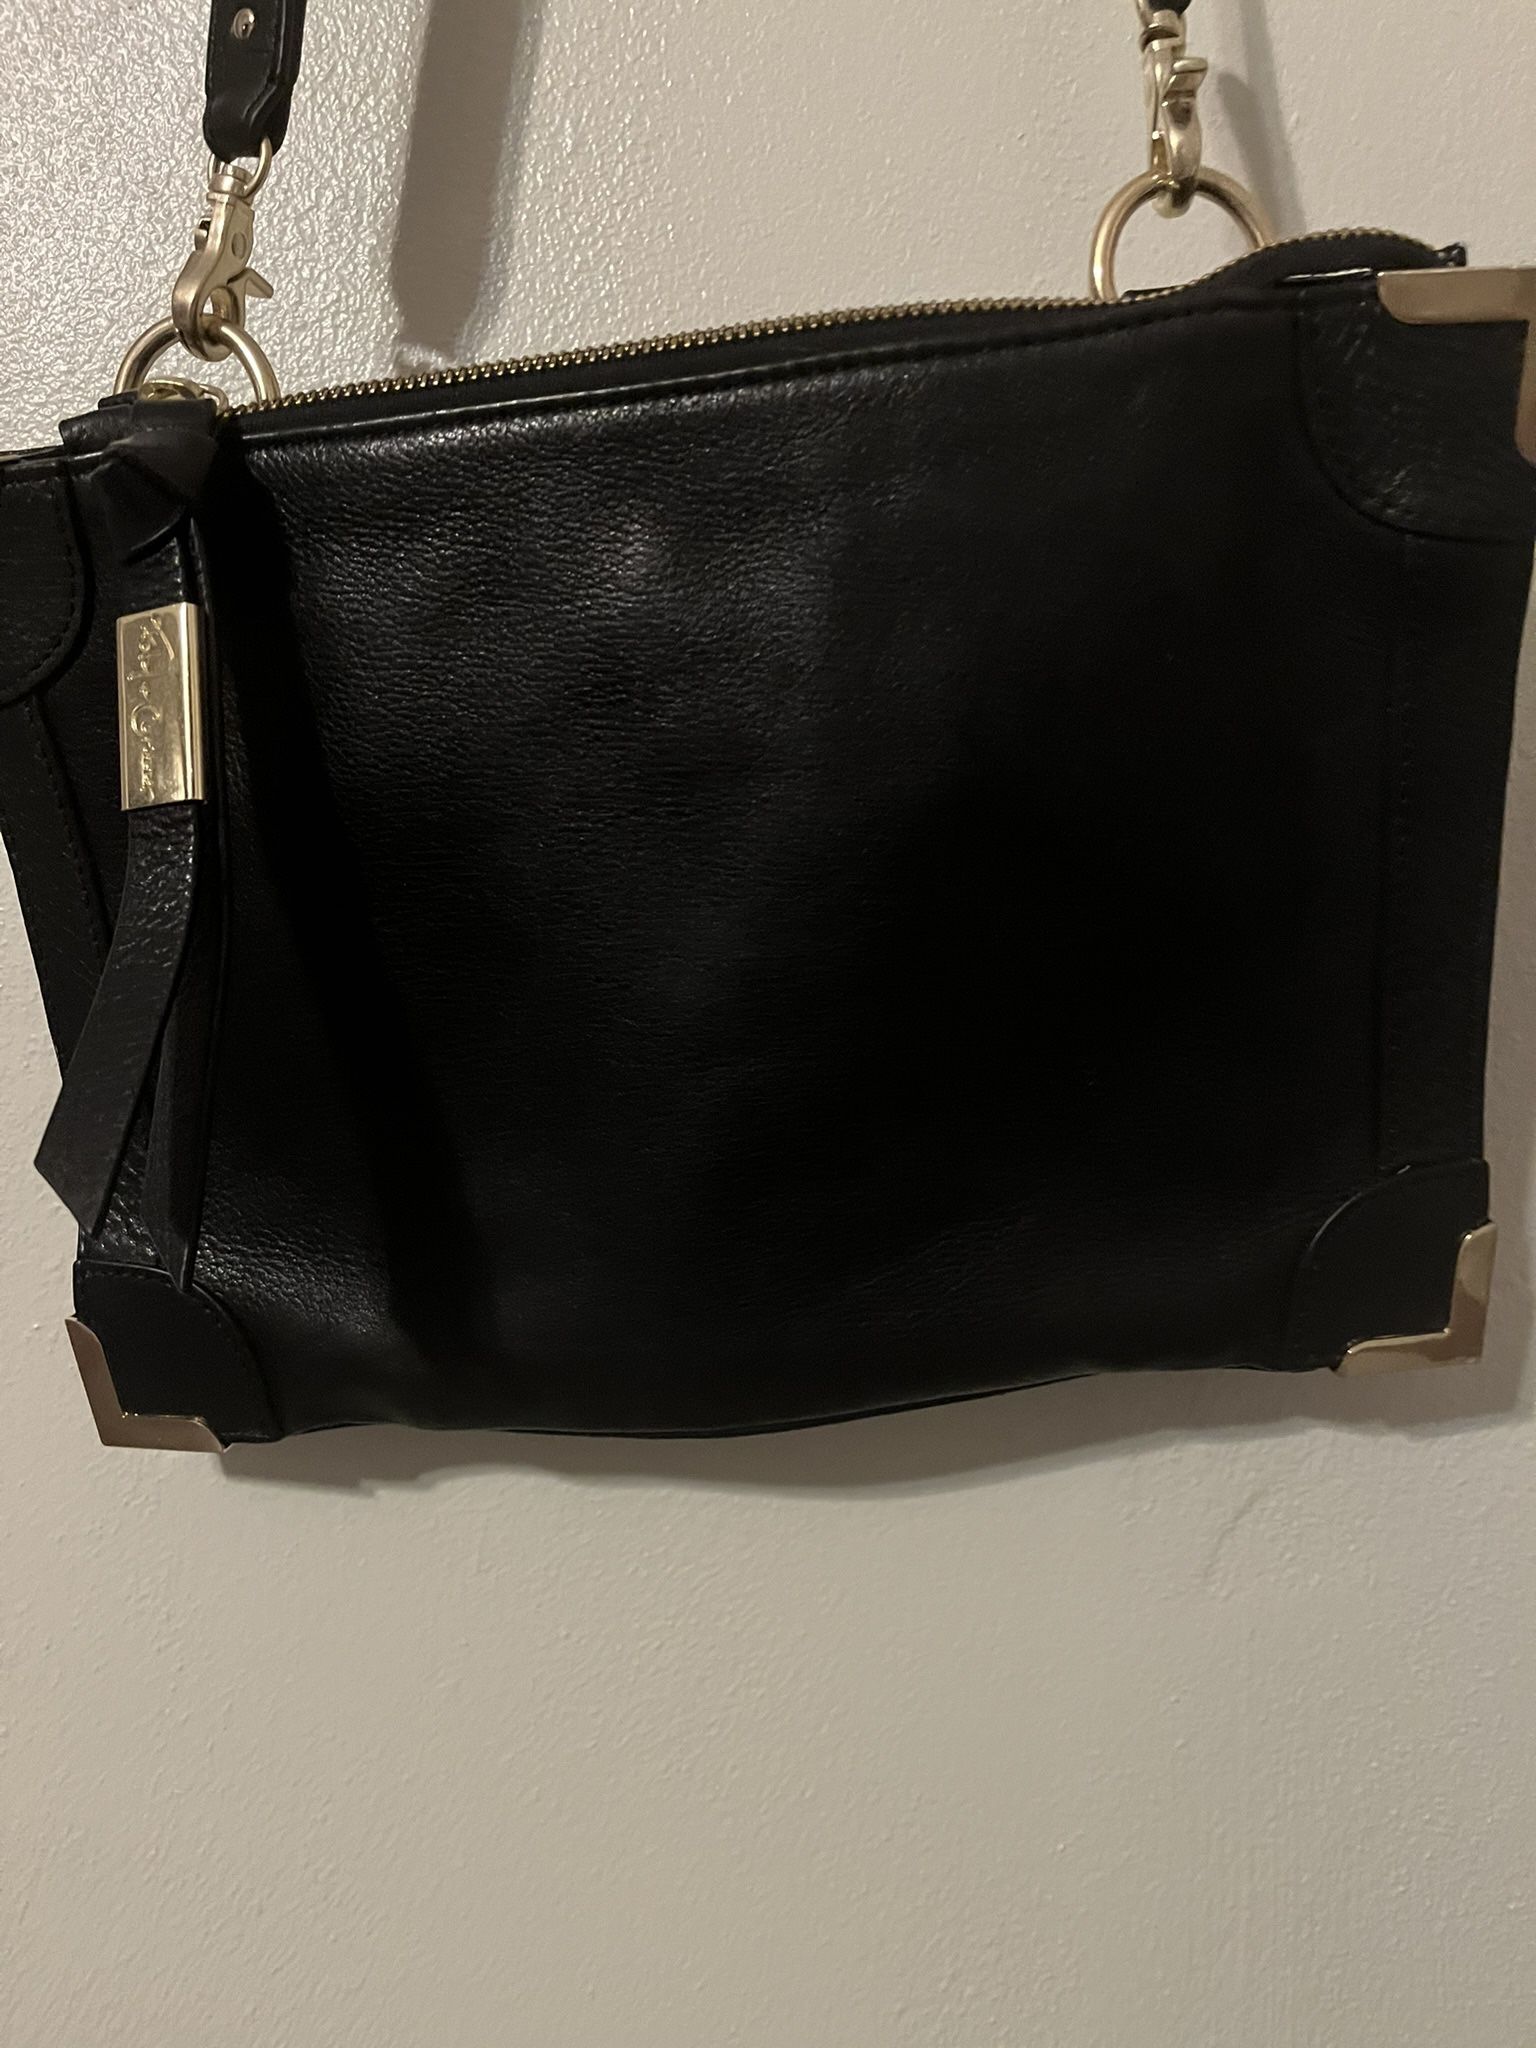 Large Leather-look Bag. Like New.